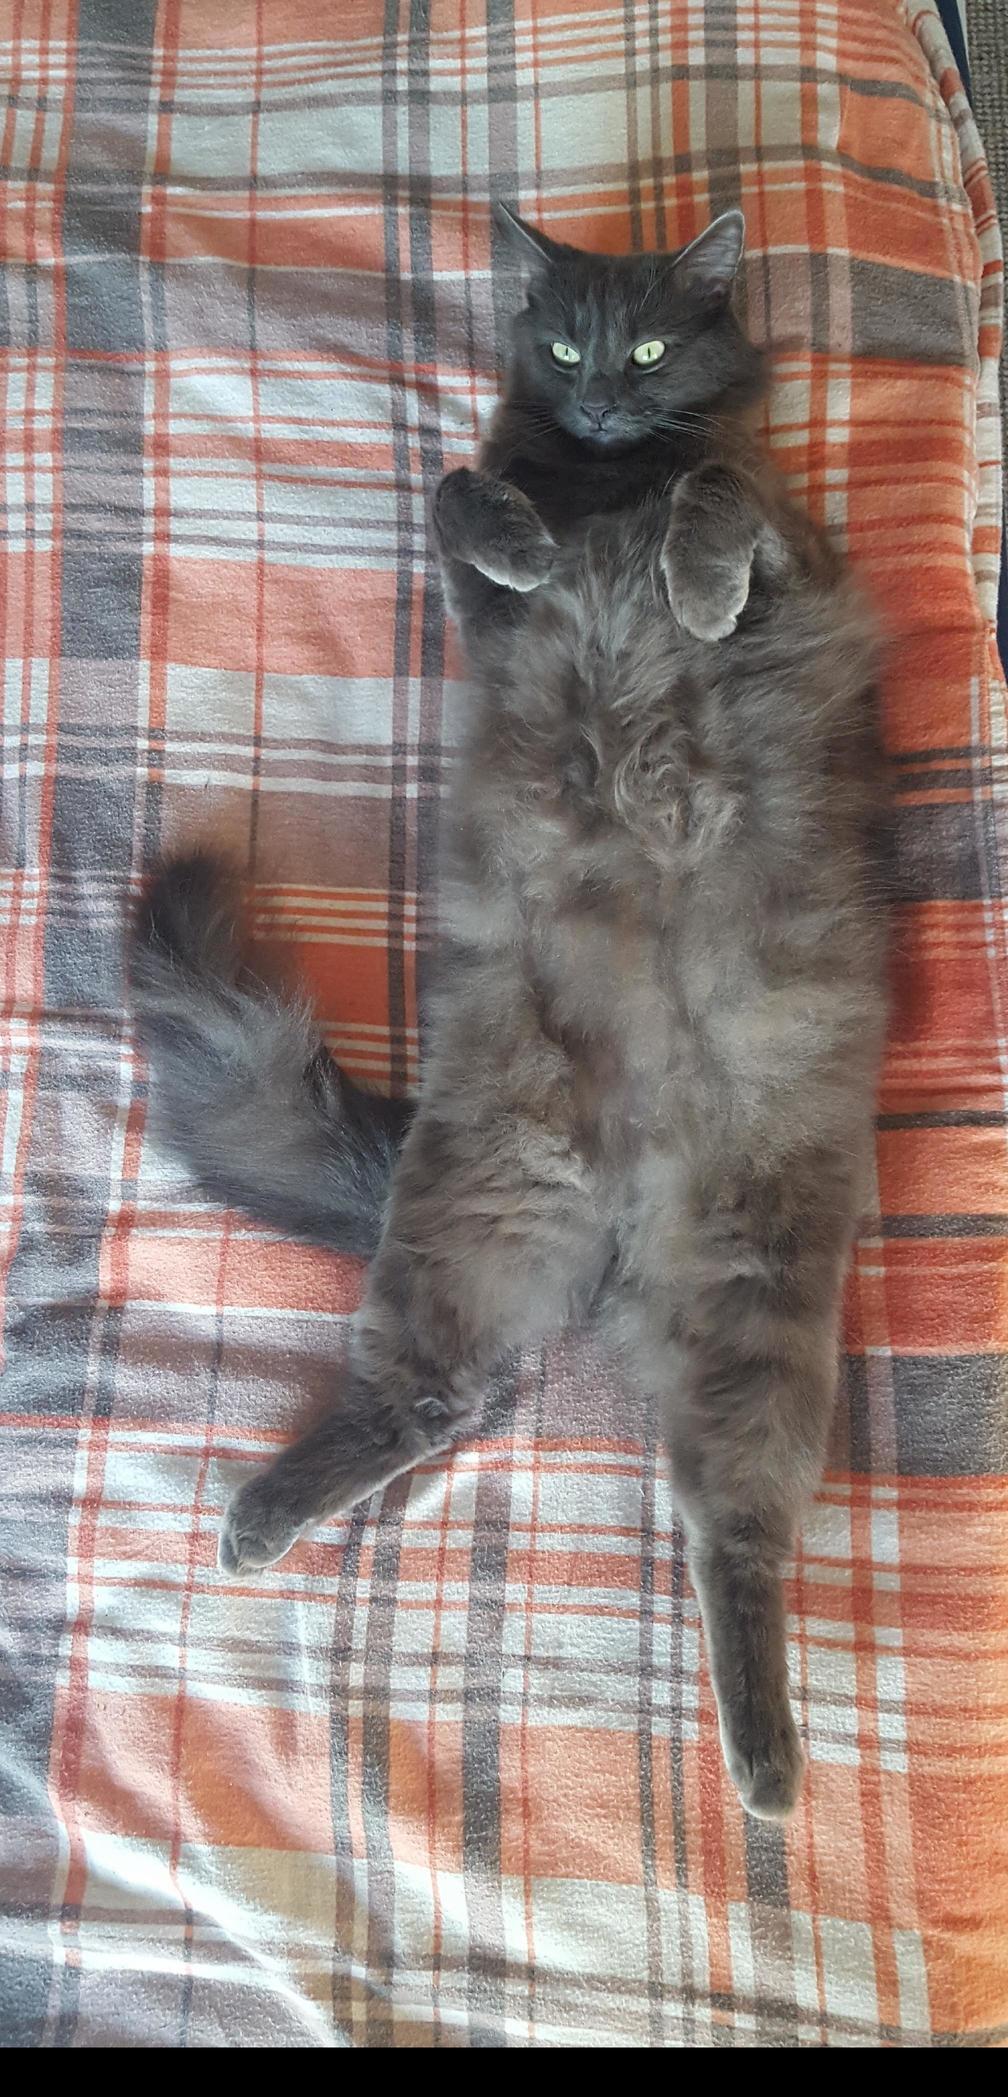 Gray floof would like some belly rubs.